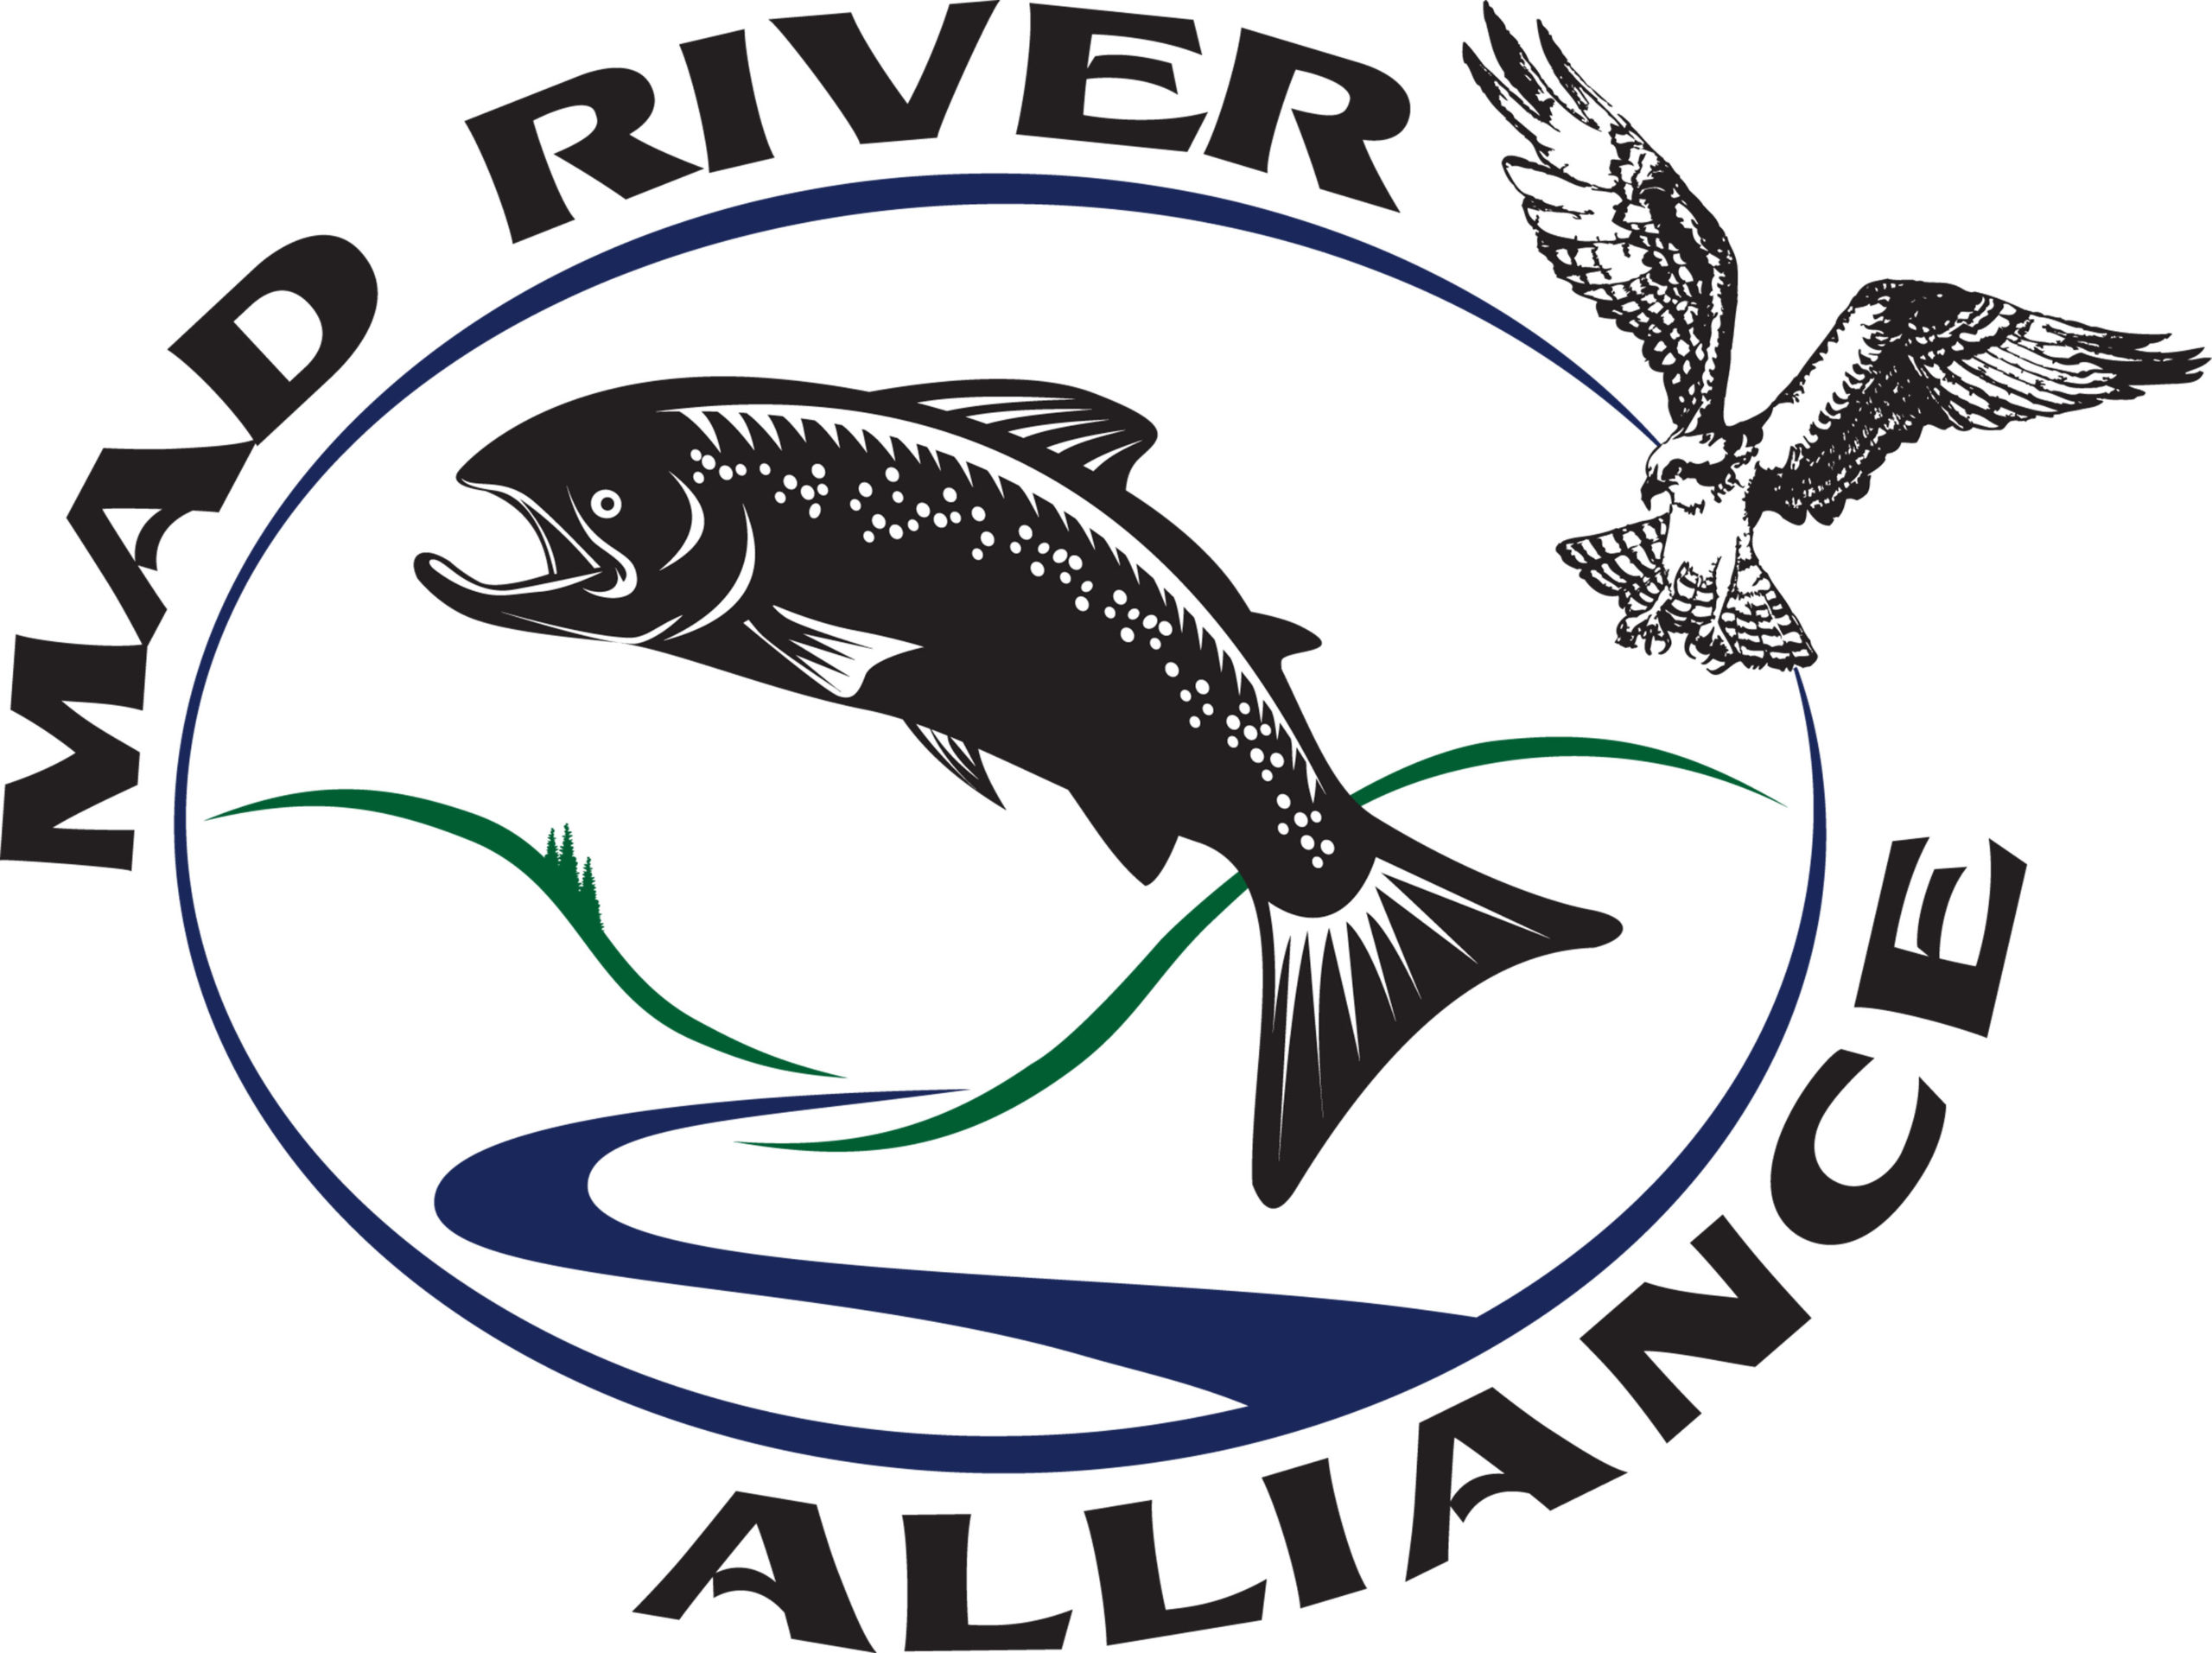 Mad River Alliance